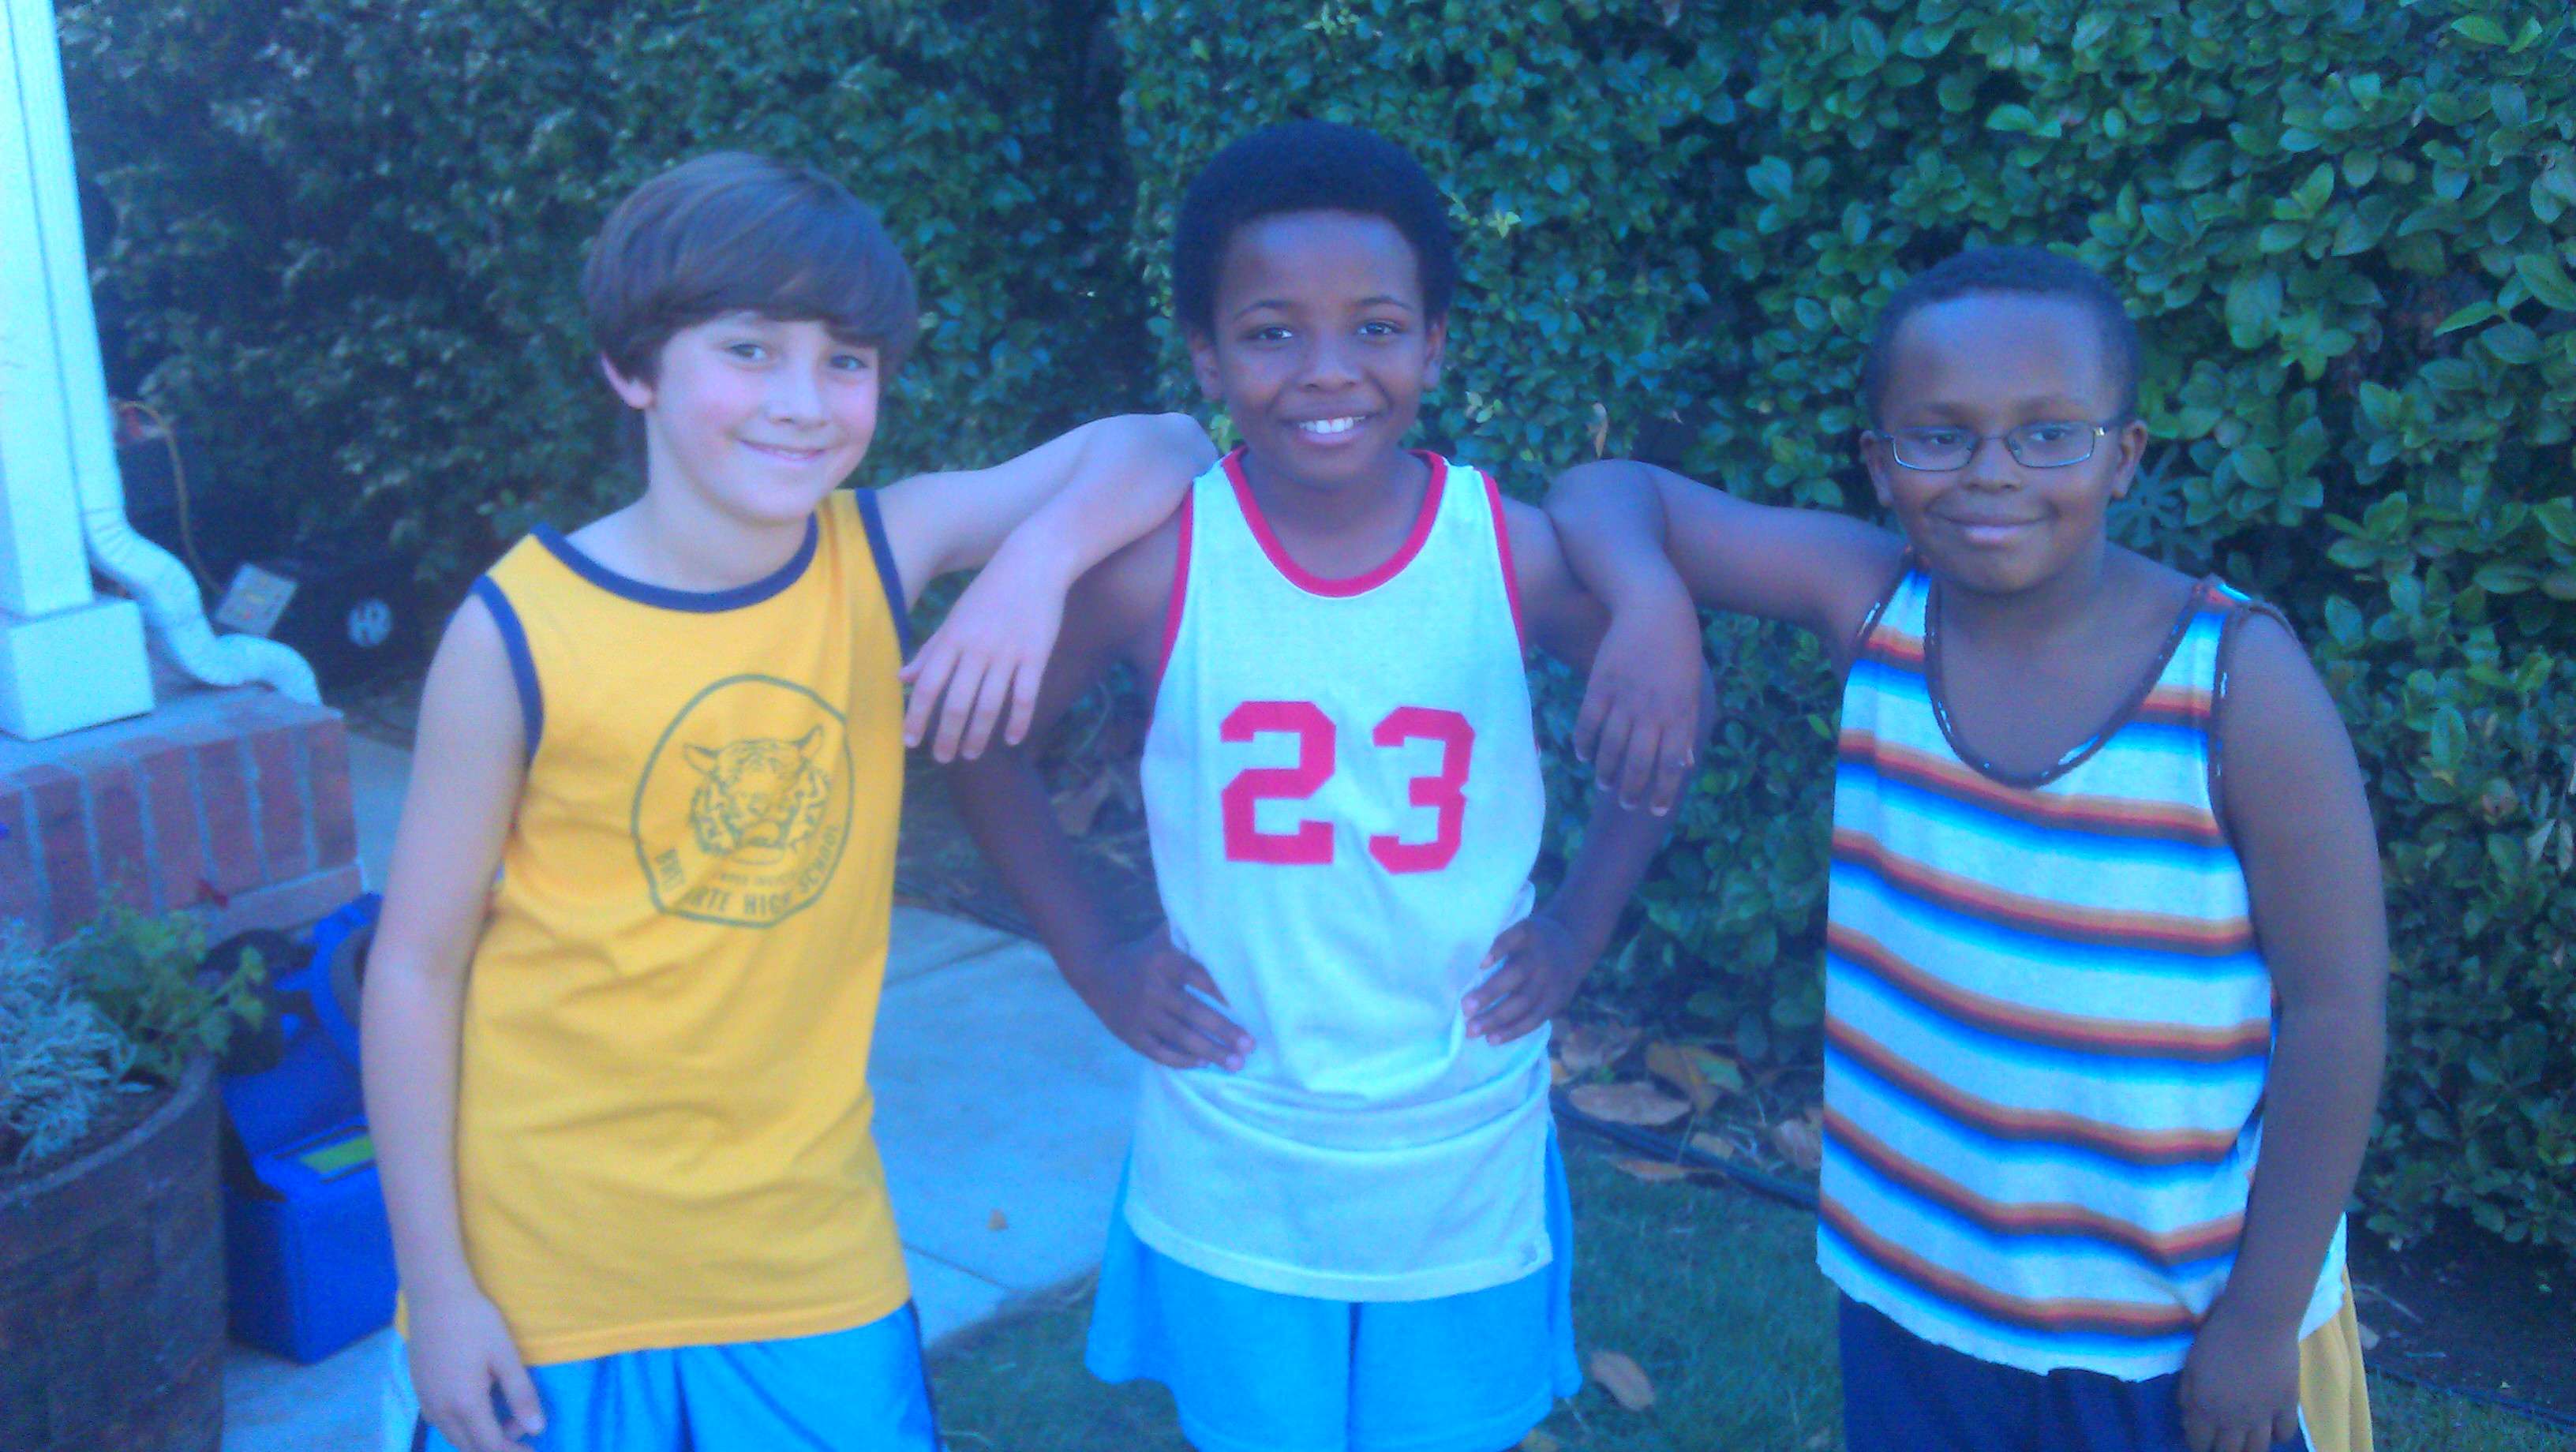 Griffin Cleveland, Dusan Brown and Soloman Leonard on the set of State Farm with Chris and Cliff Paul commercial. http://www.youtube.com/watch?v=kbRdDhYFGSw